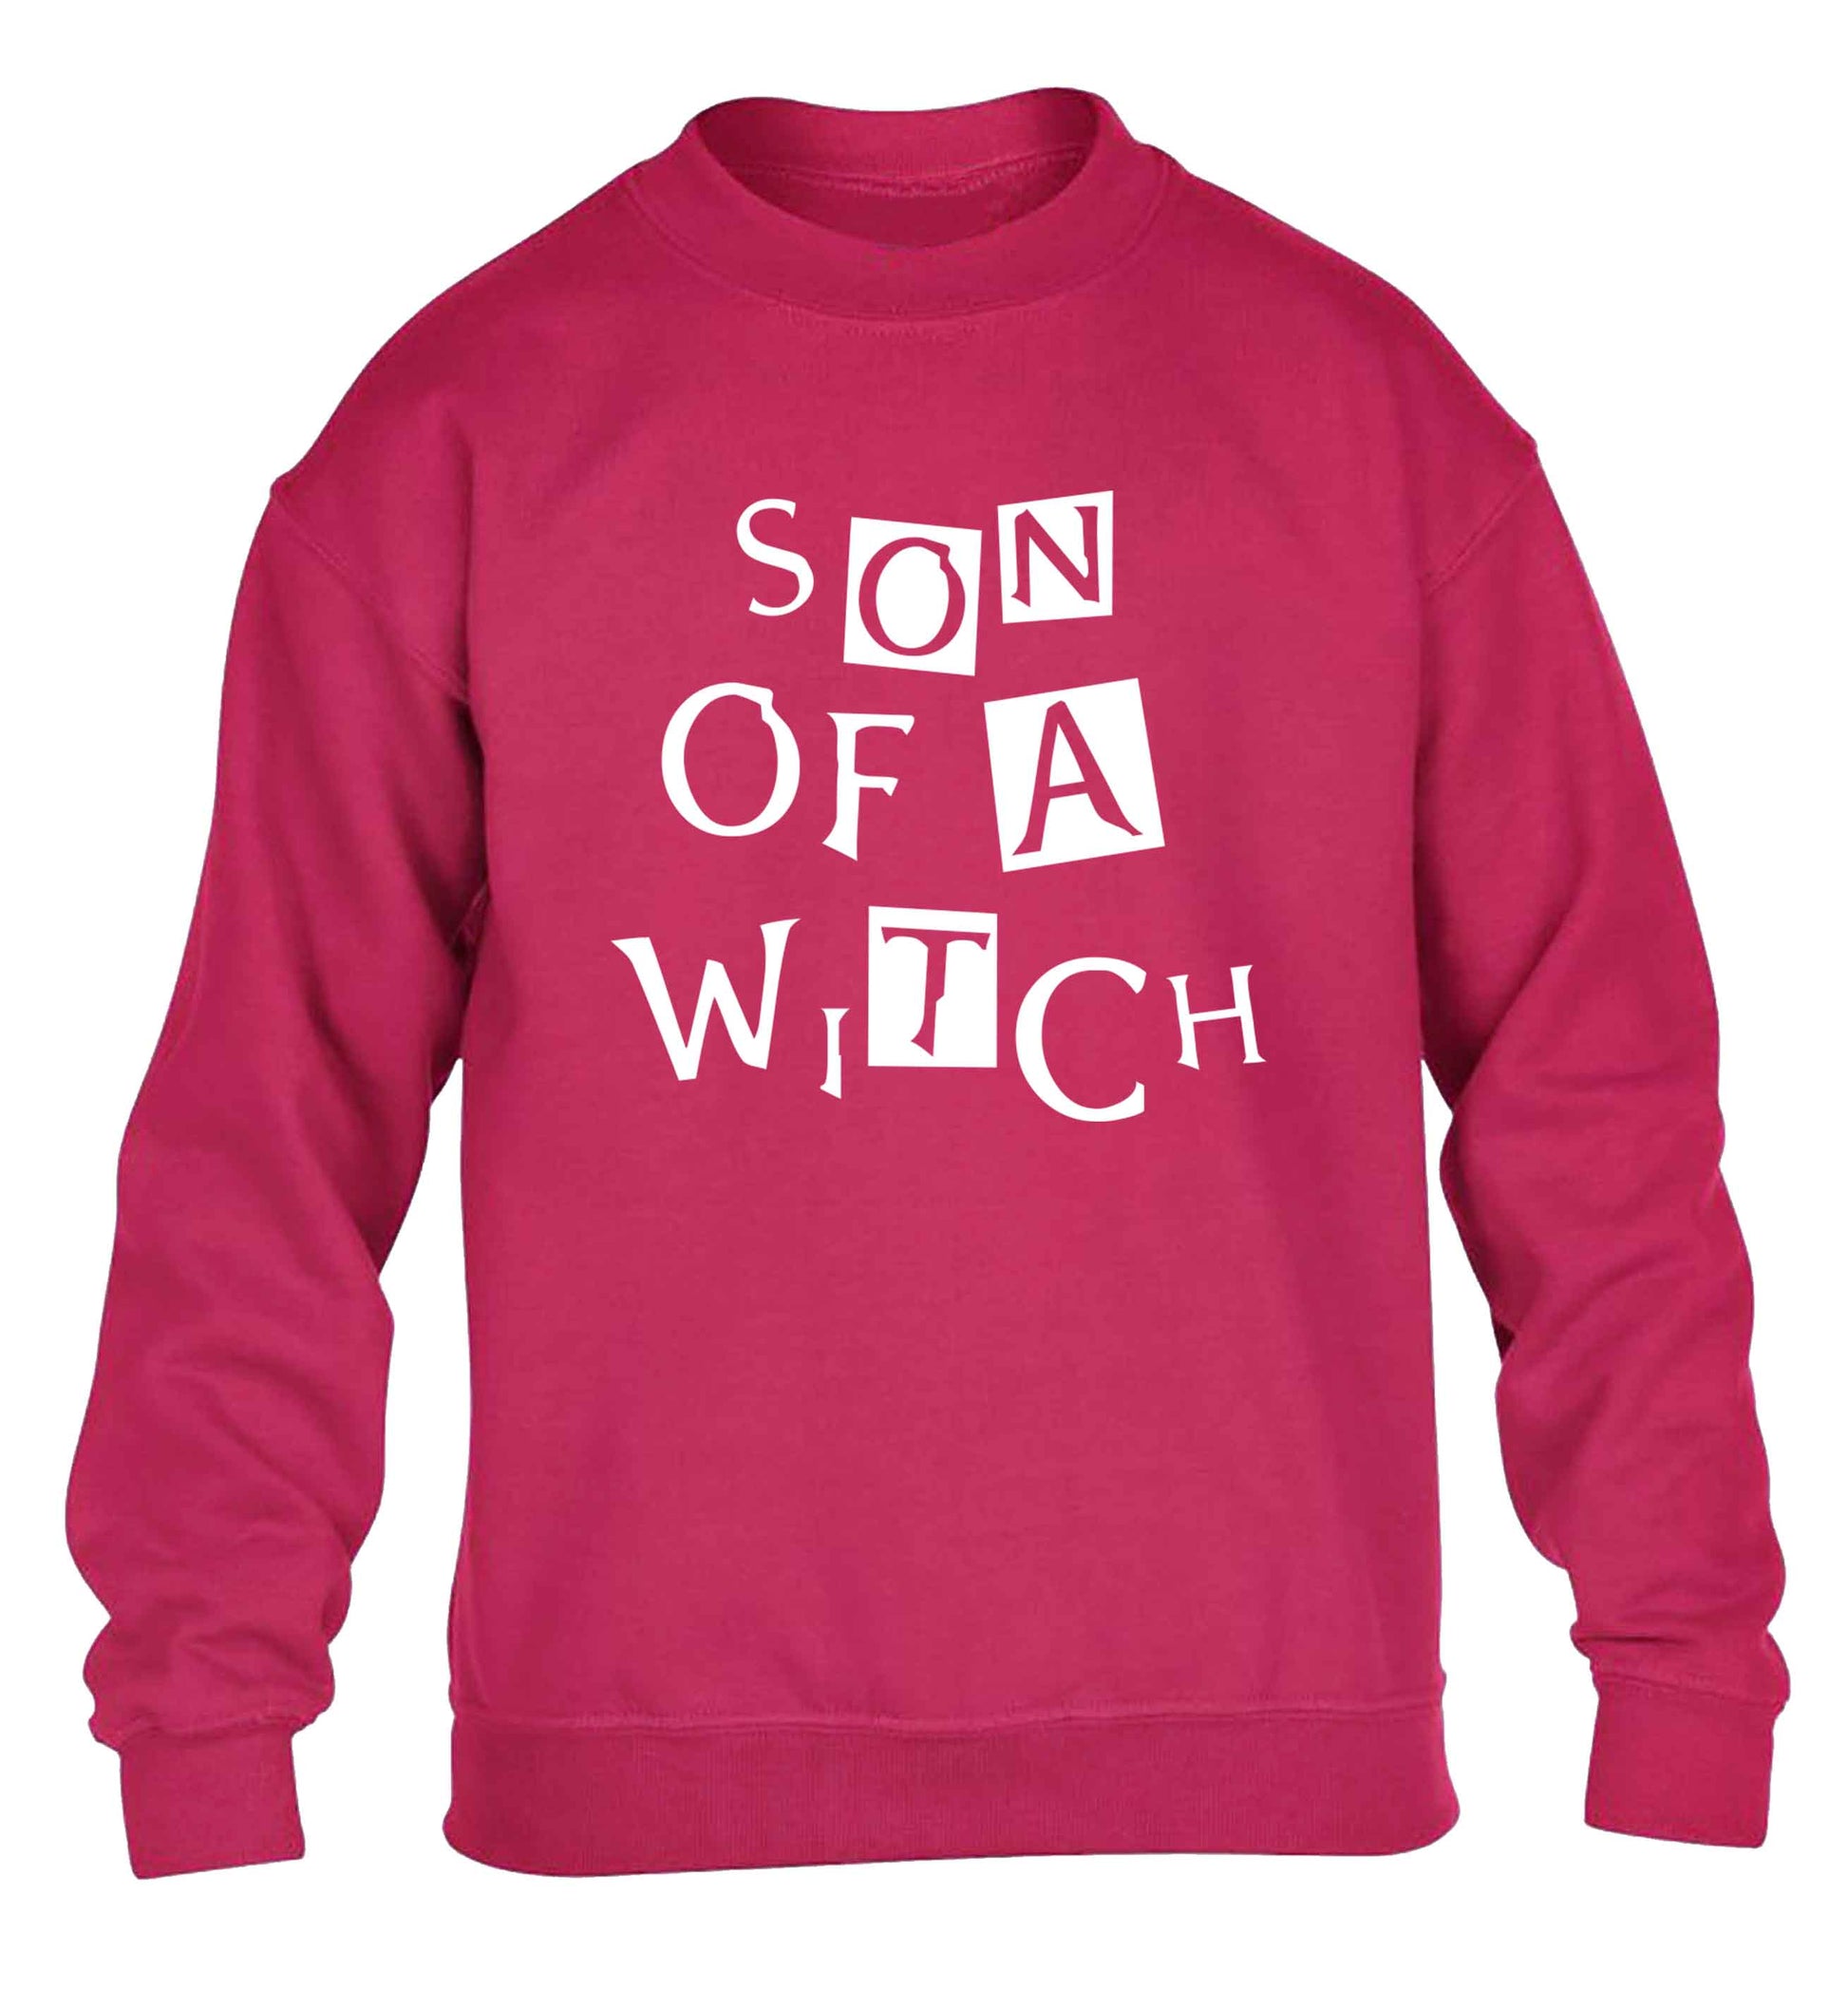 Son of a witch children's pink sweater 12-13 Years